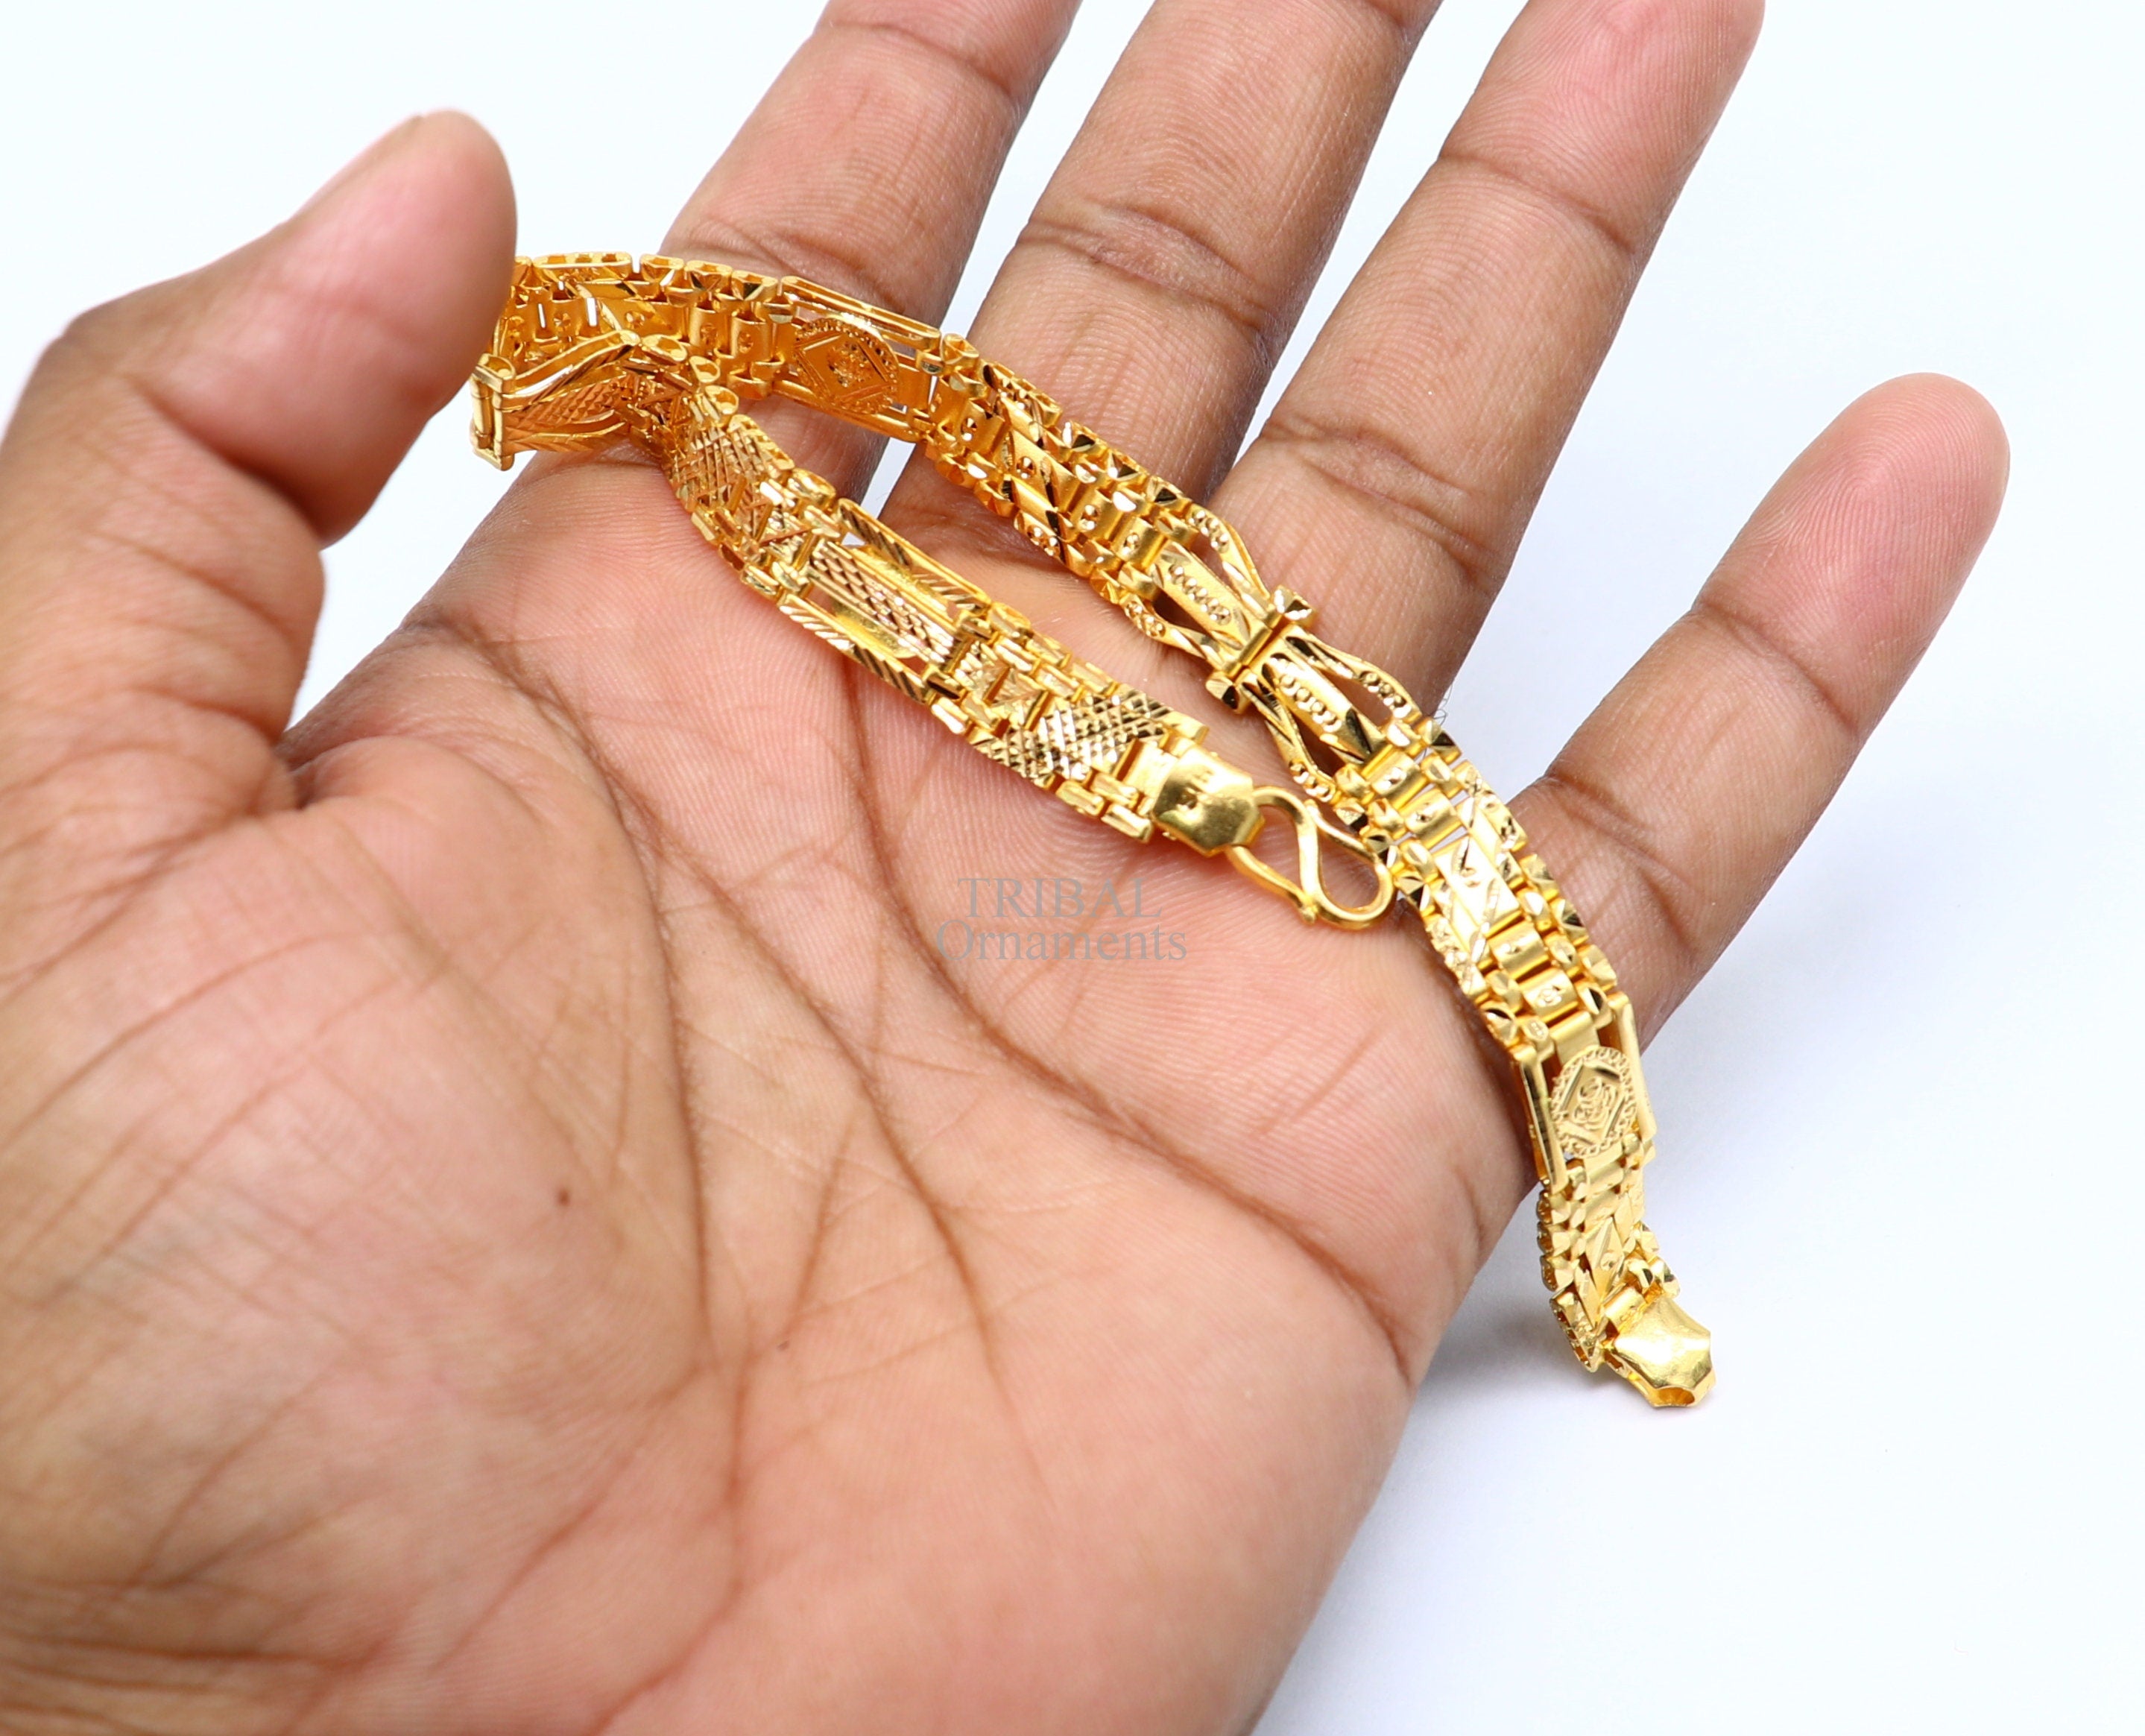 I'm very new to the jewelry scene and I was wondering how much a bracelet  like this would cost solid gold? The one in pic is one I have now but it's